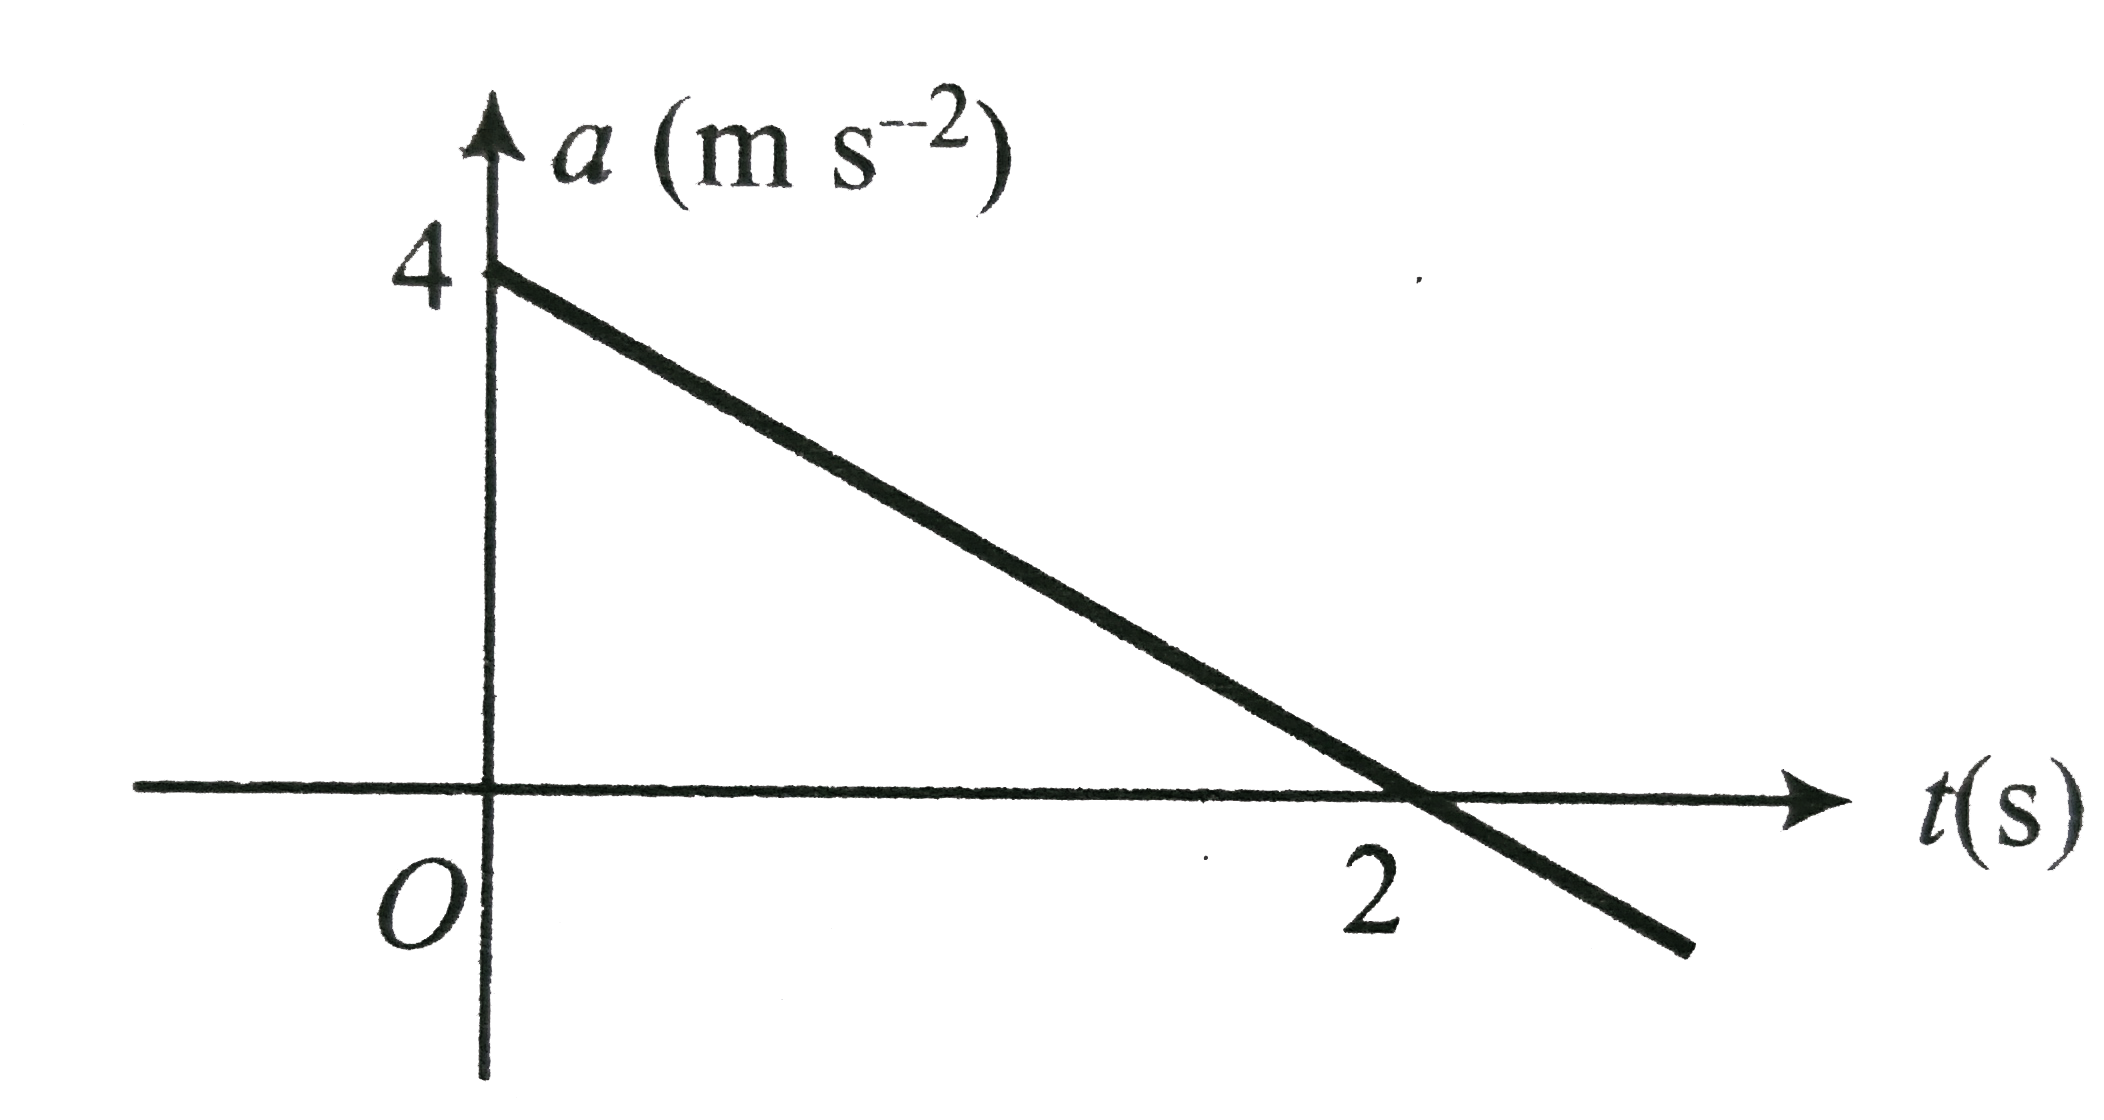 The acceleration versus time graph of a particle moving in a straight line is show in figure. The velocity-time graph of the particle would be   .